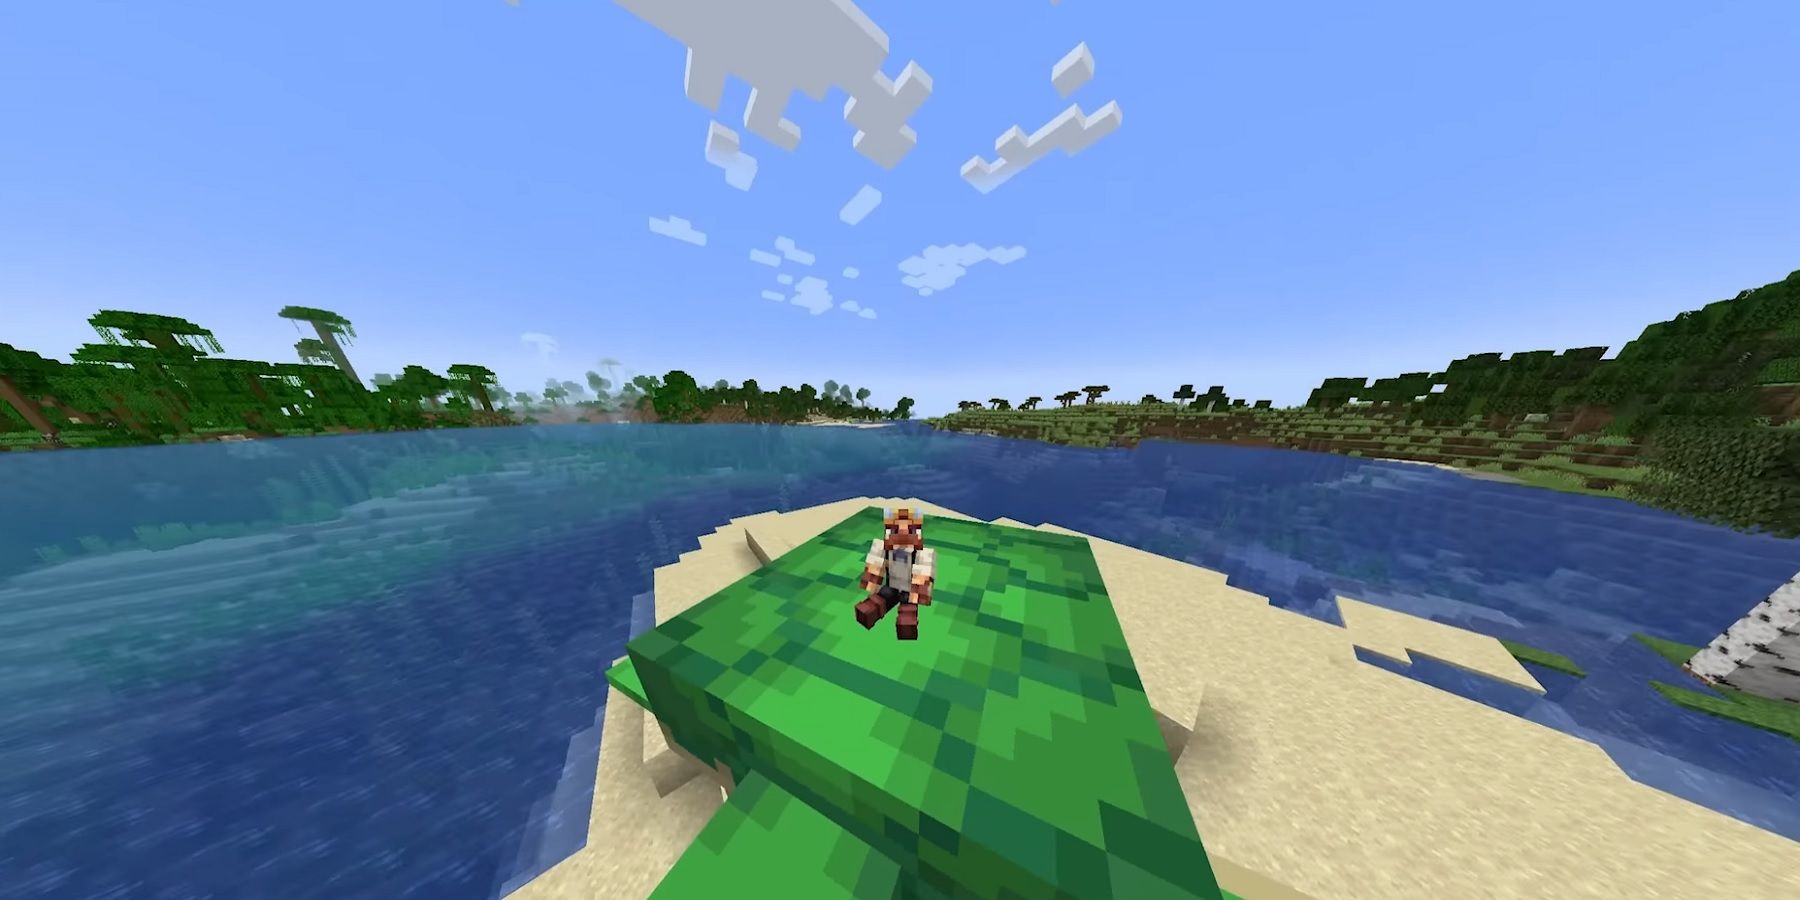 Image from Minecraft showing the player riding on the back of a giant sea turtle.